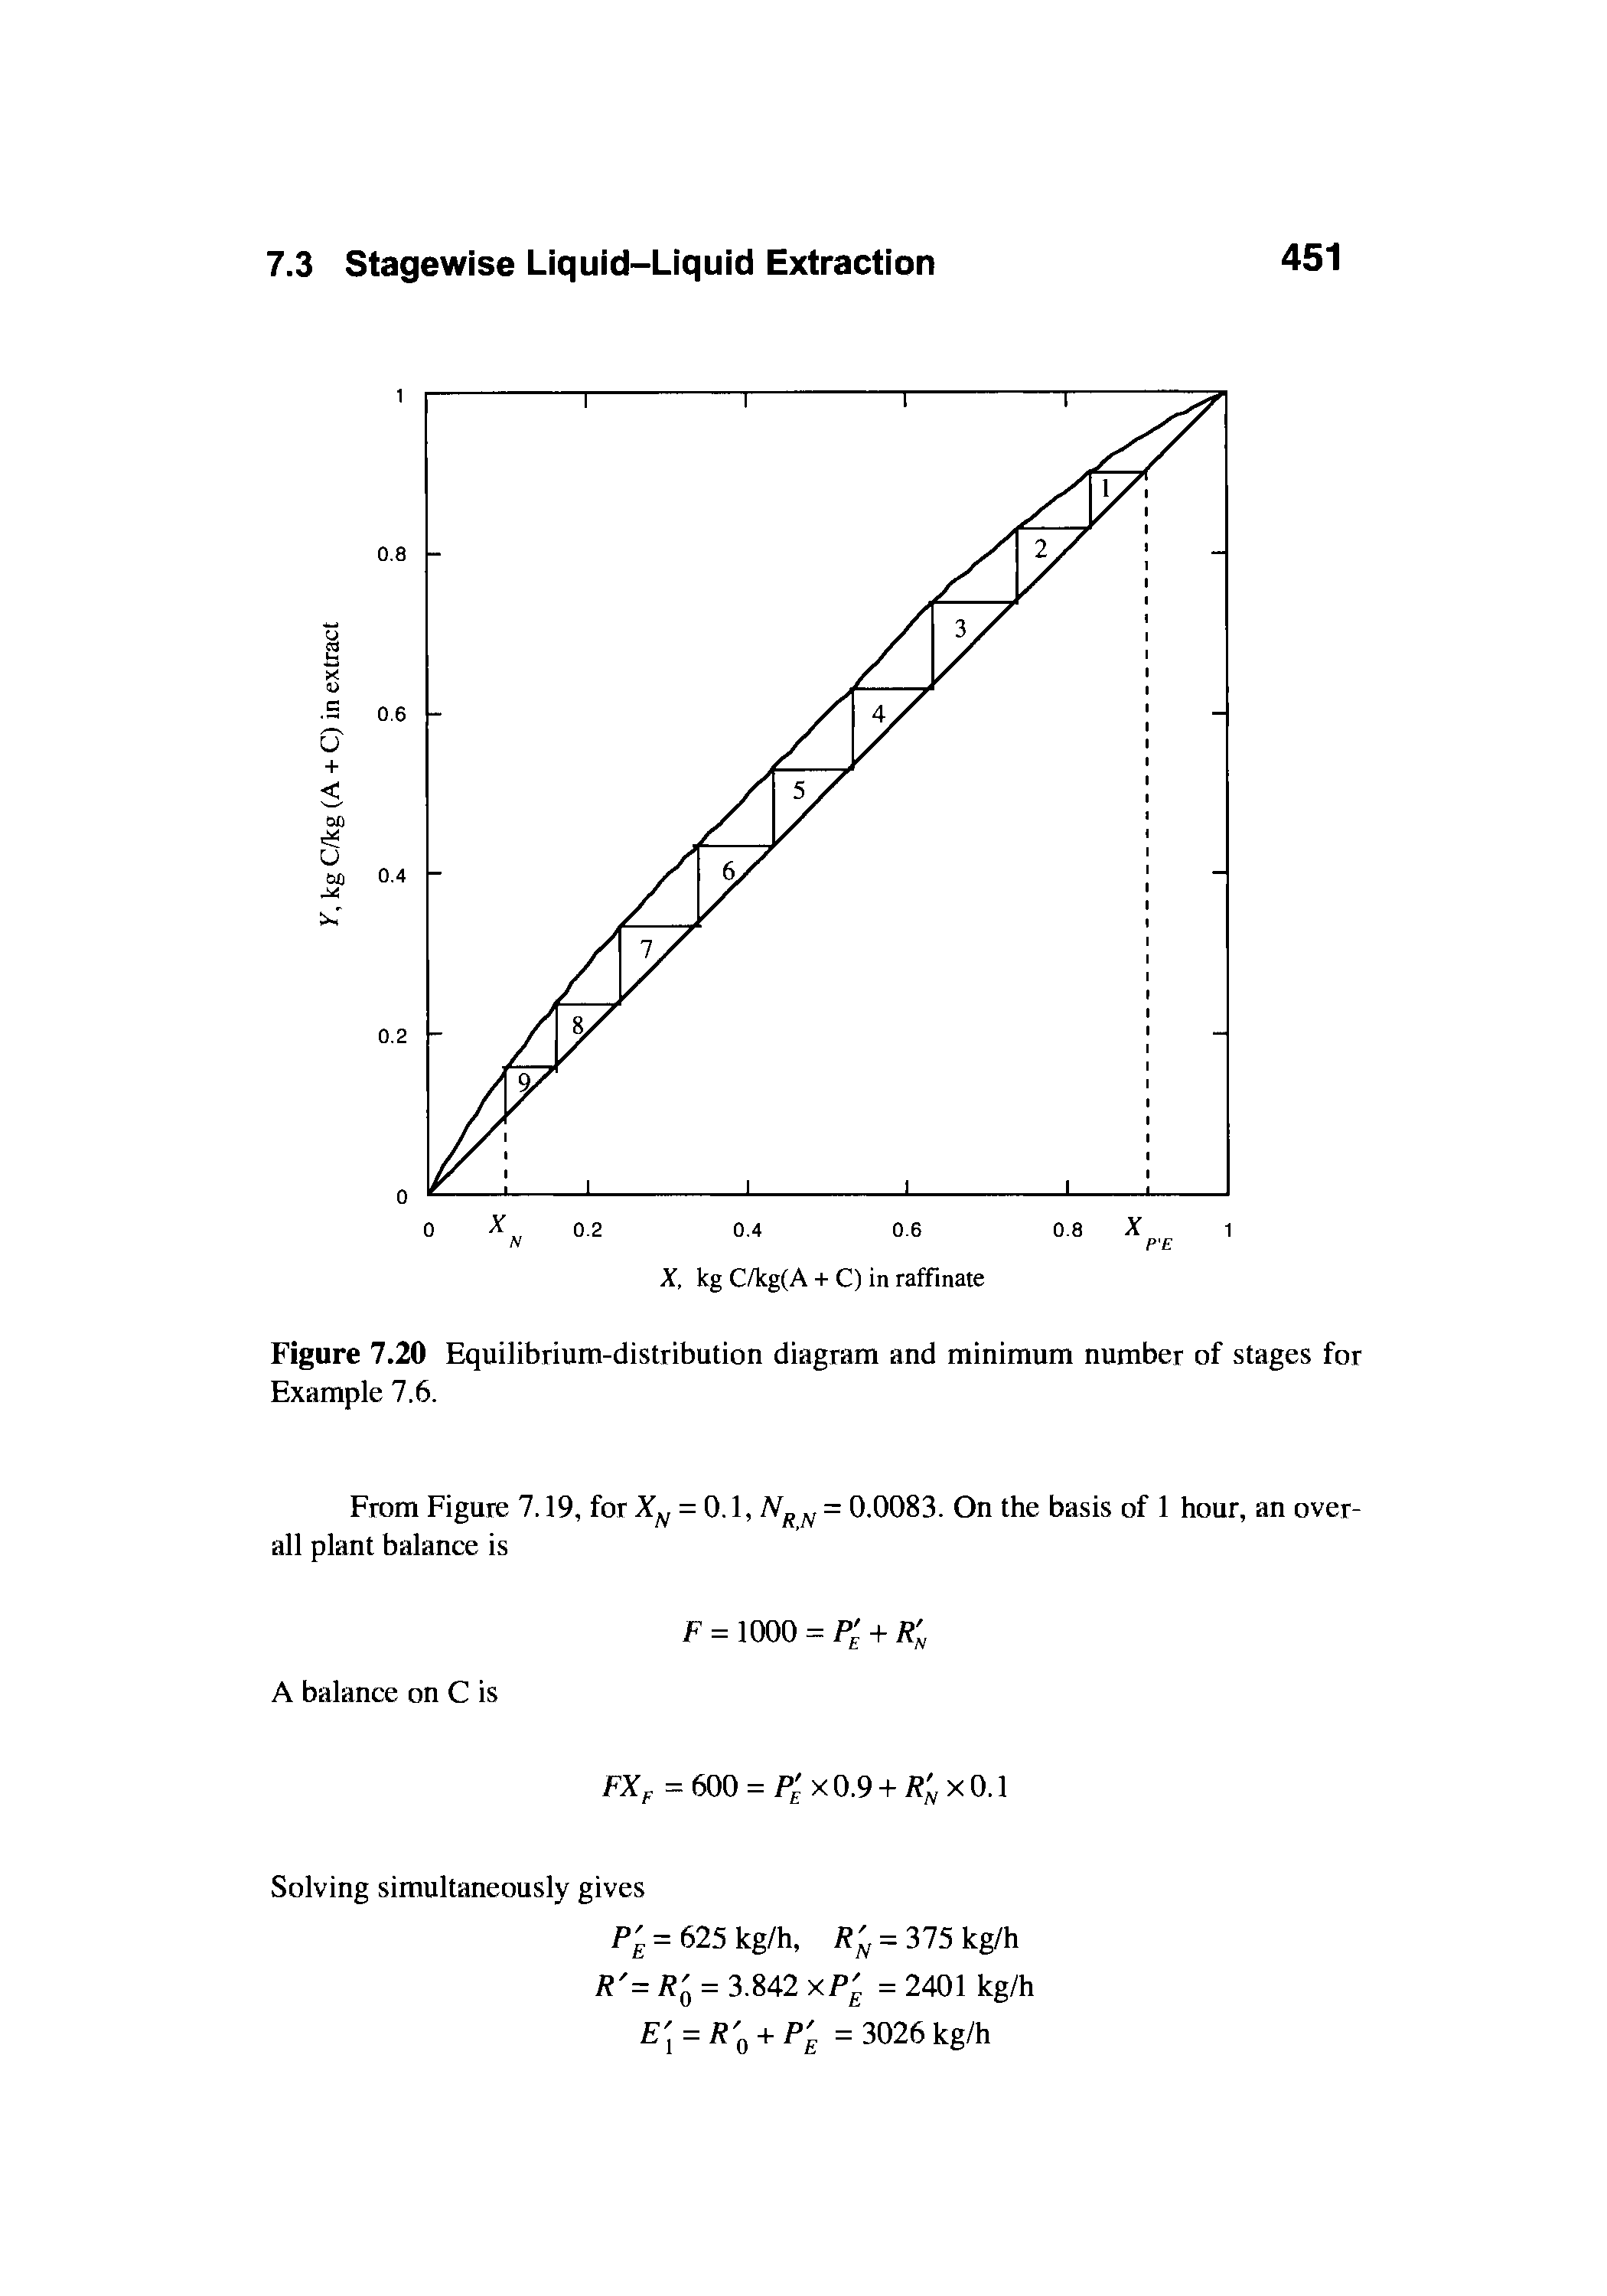 Figure 7.20 Equilibrium-distribution diagram and minimum number of stages for Example 7.6.